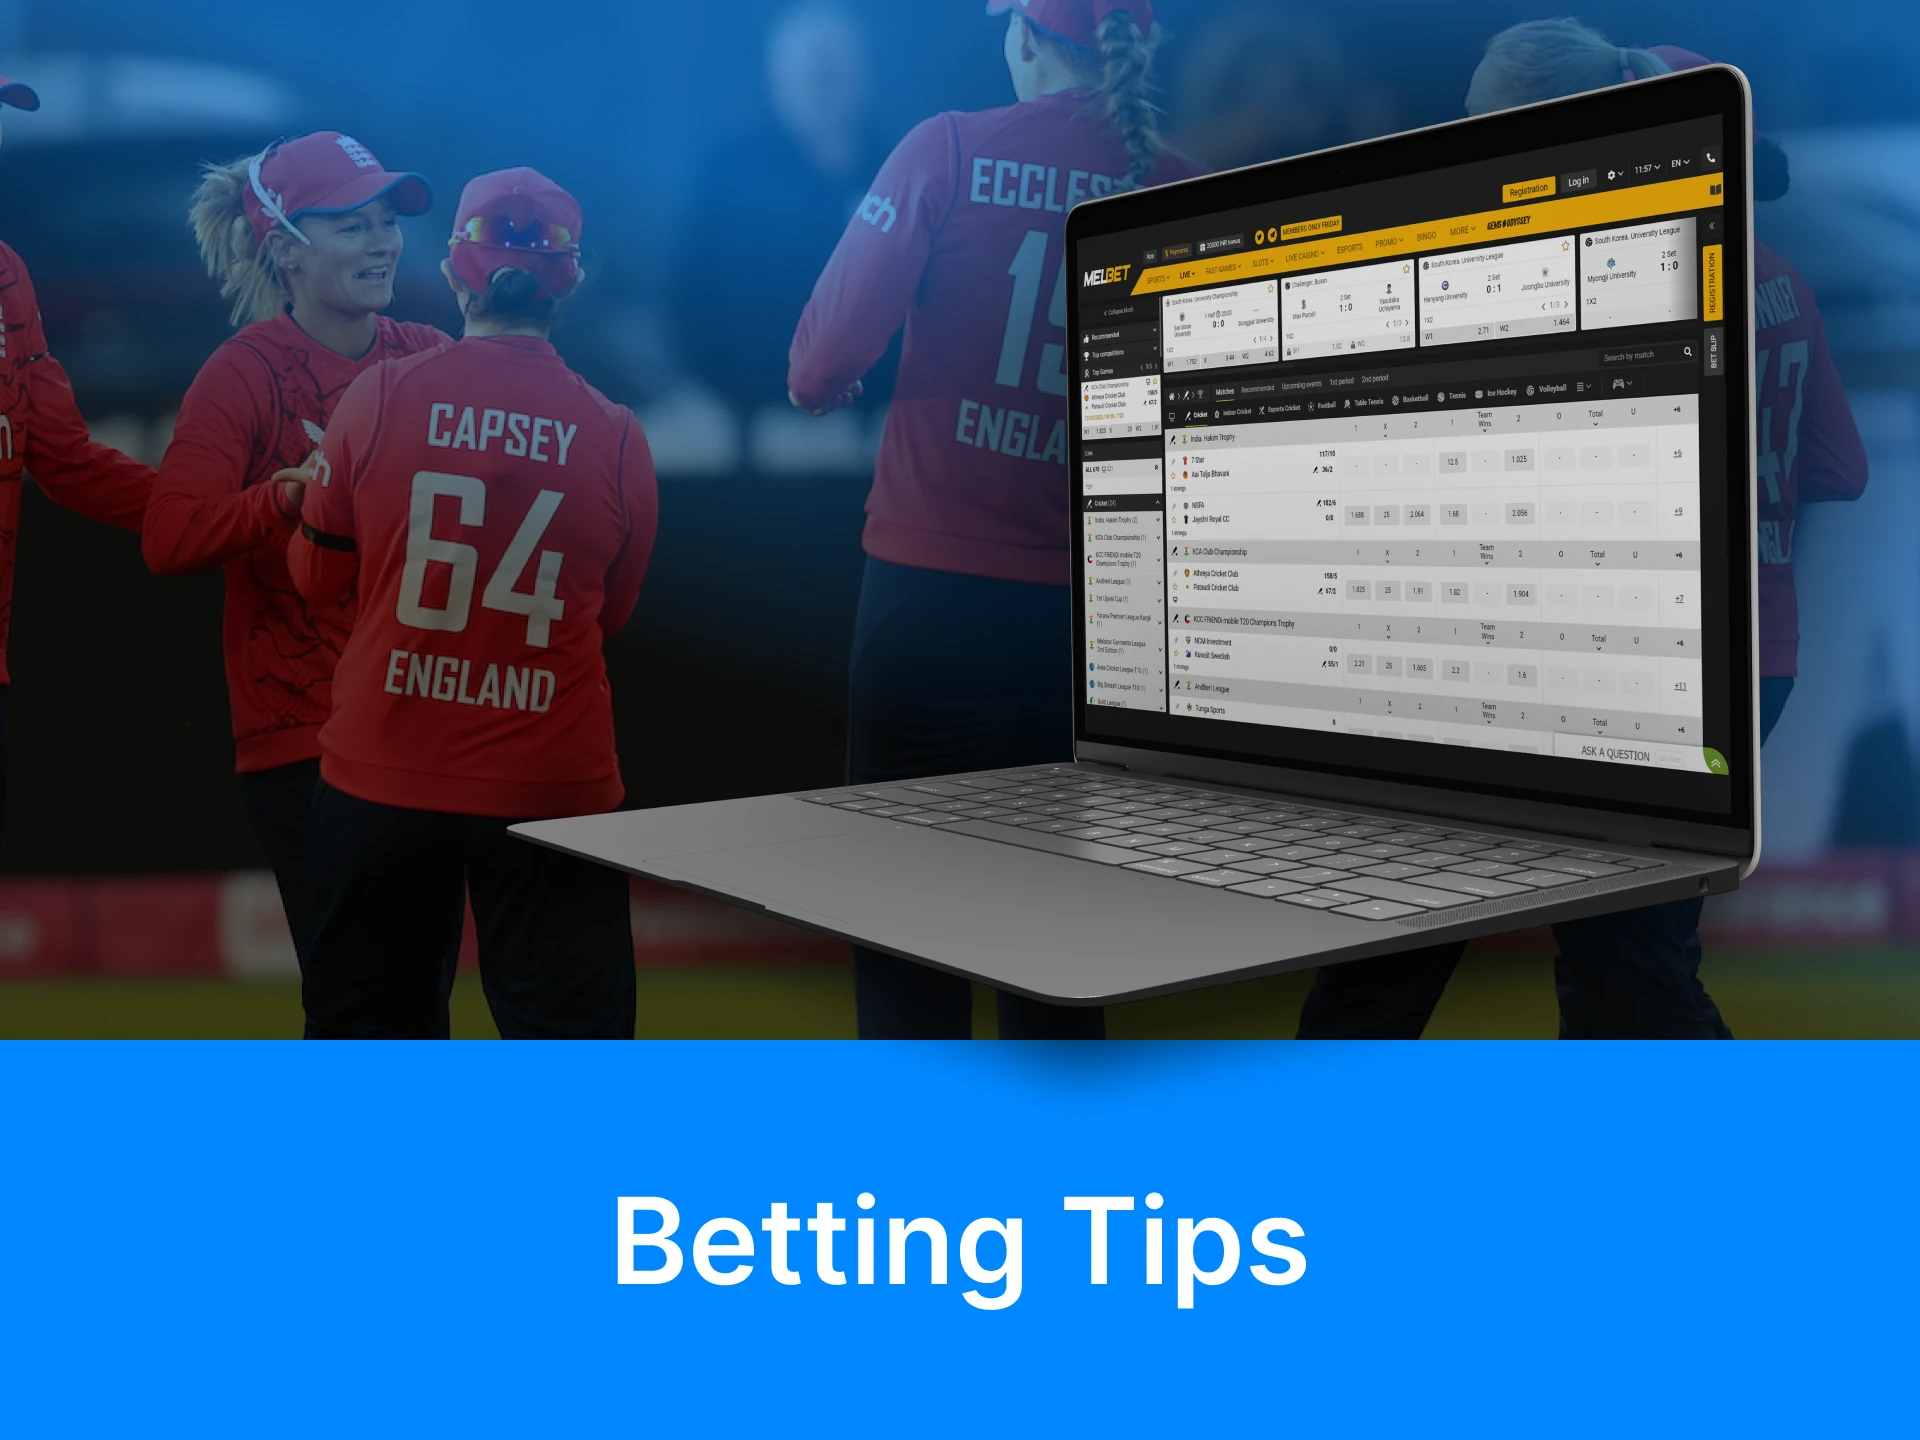 Follow tips to have more chances to increase your profit from betting on the Women's Ashes series.